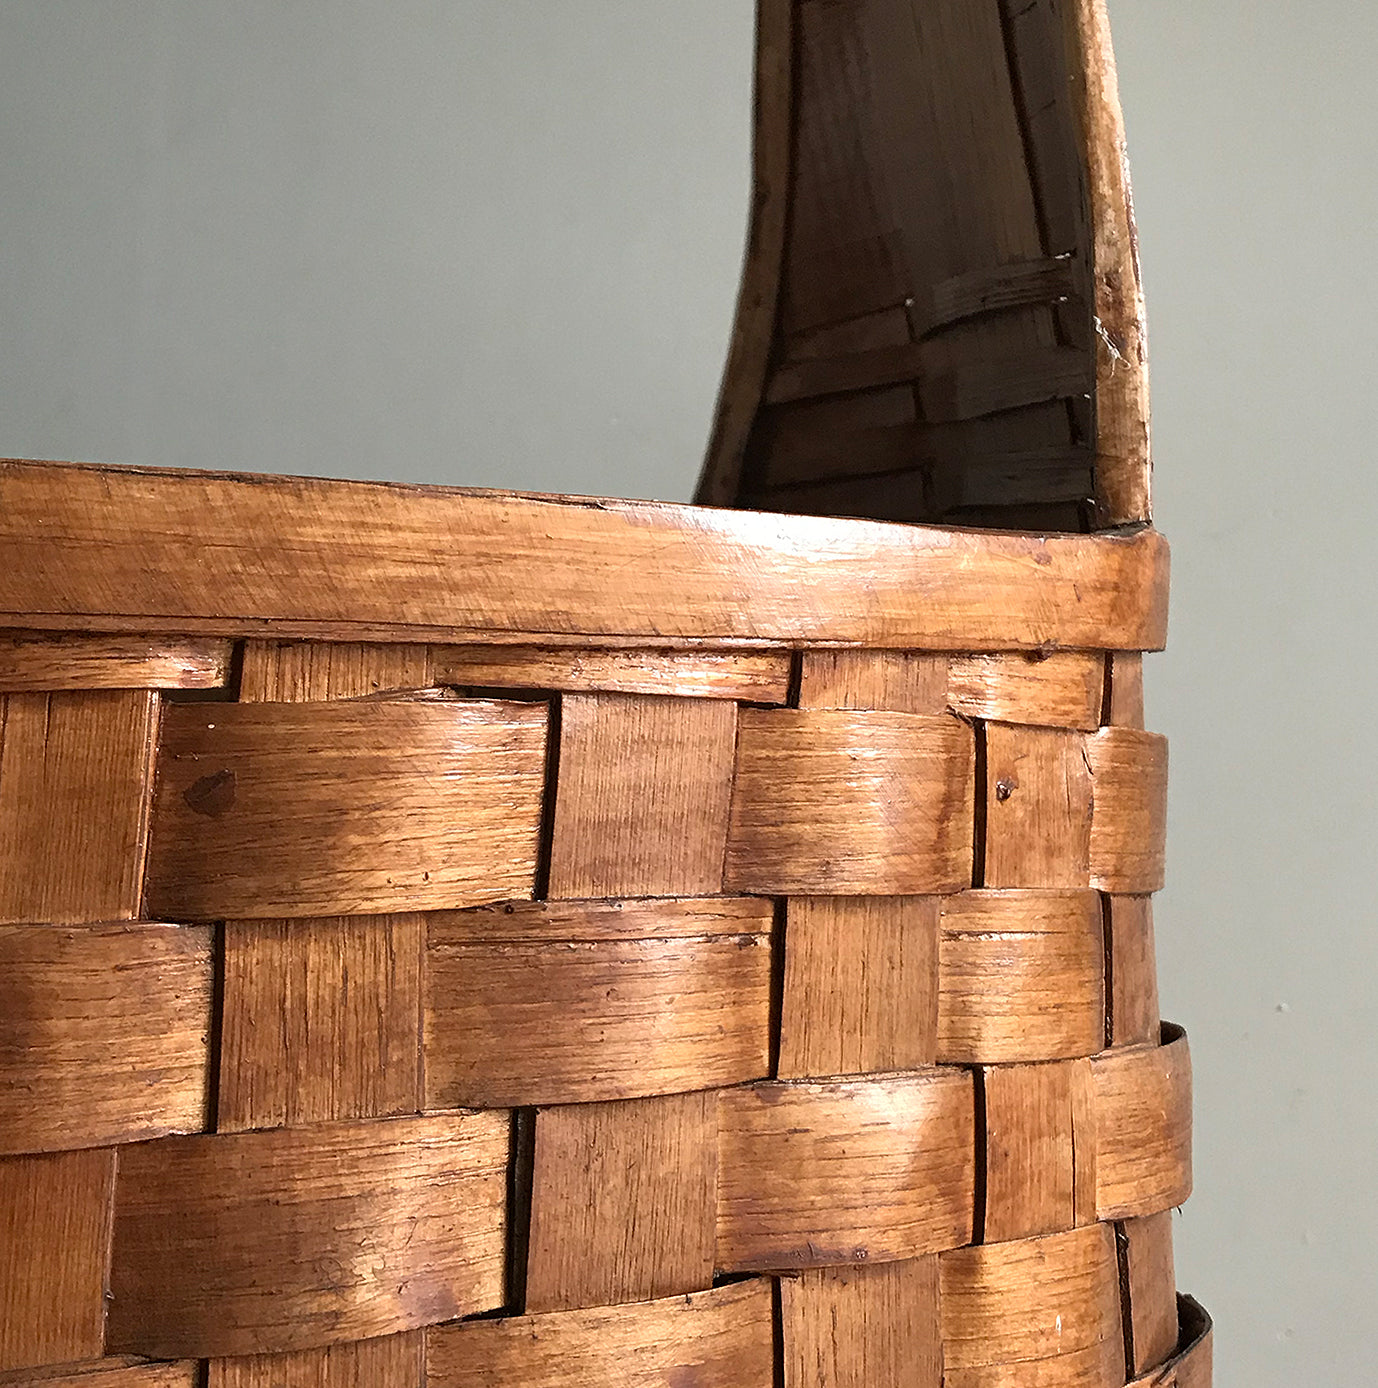 A good looking and practical tall Spanish Bread Basket. This basket would have originally have been used for long sticks of bread and would still serve that purpose well today. Or, you could always use it as an umbrella holder! - SHOP NOW -www.intovintage.co.uk